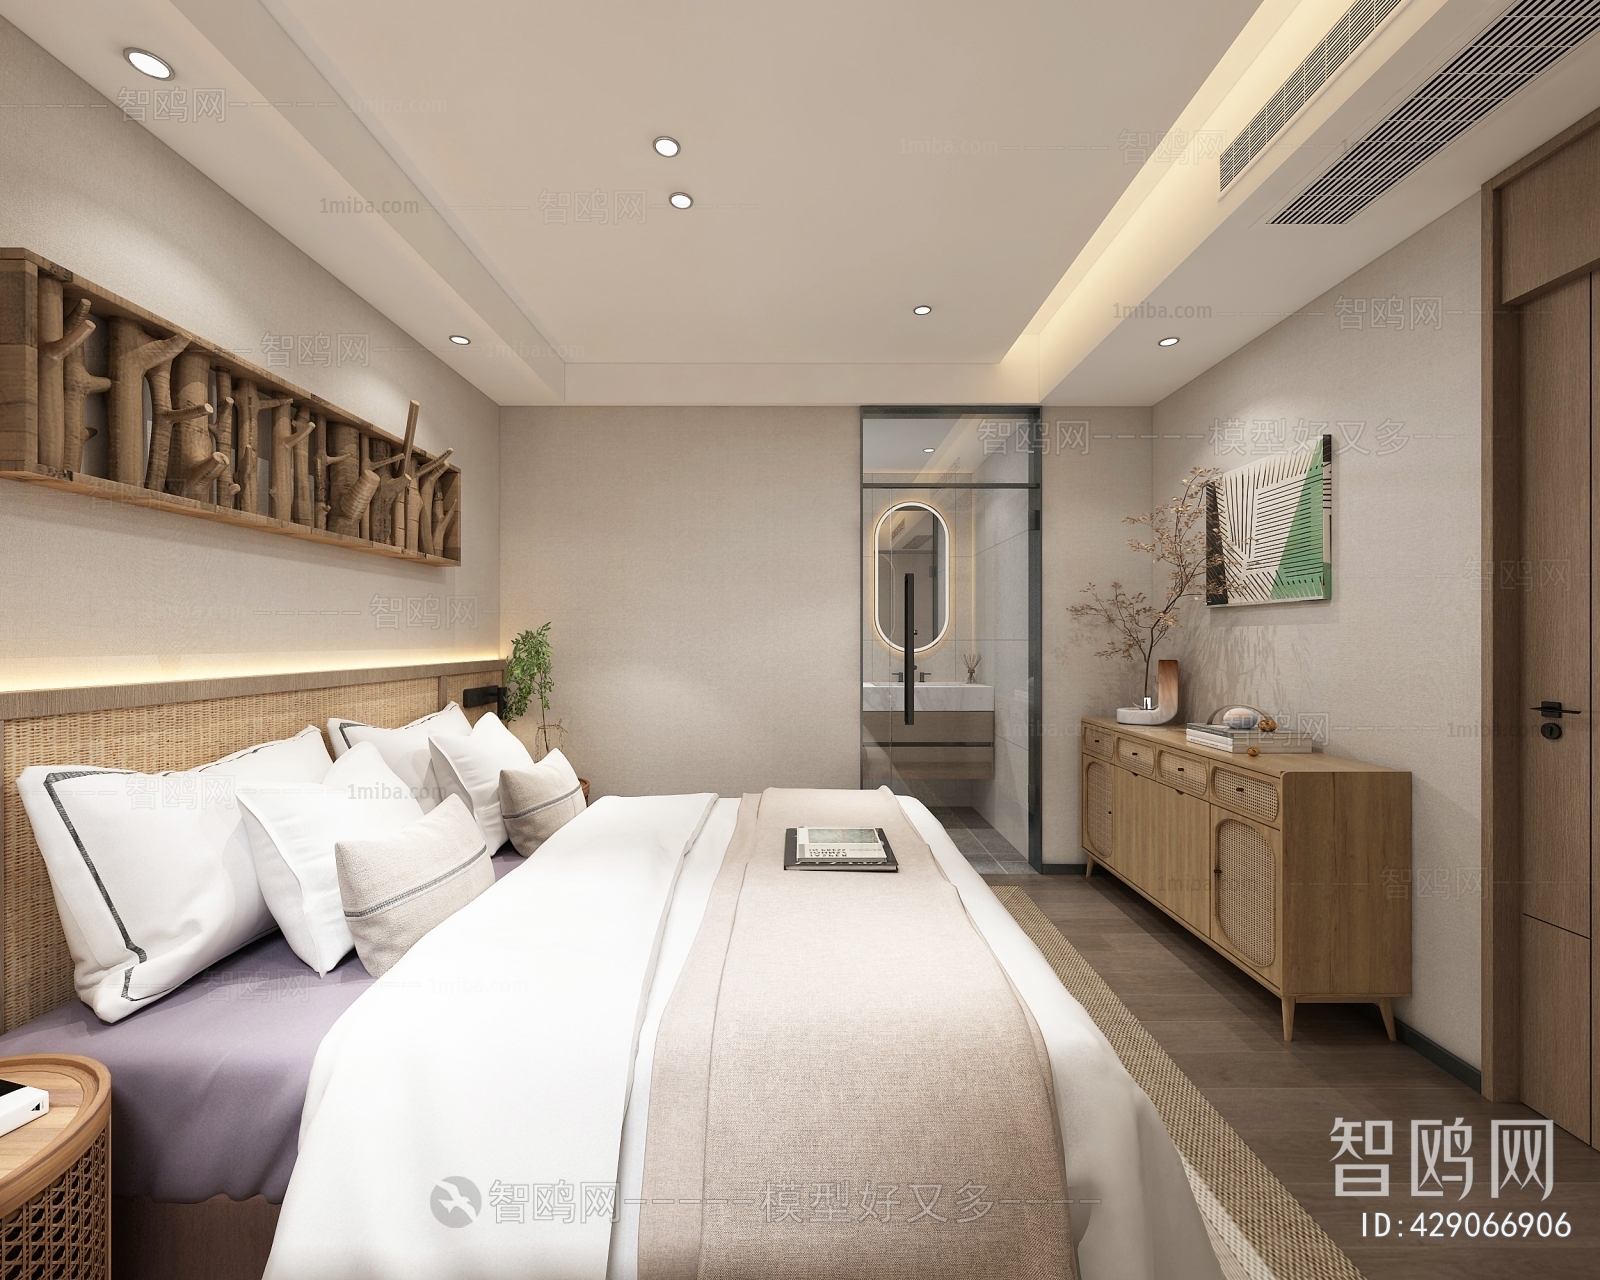 New Chinese Style Residential Hostel